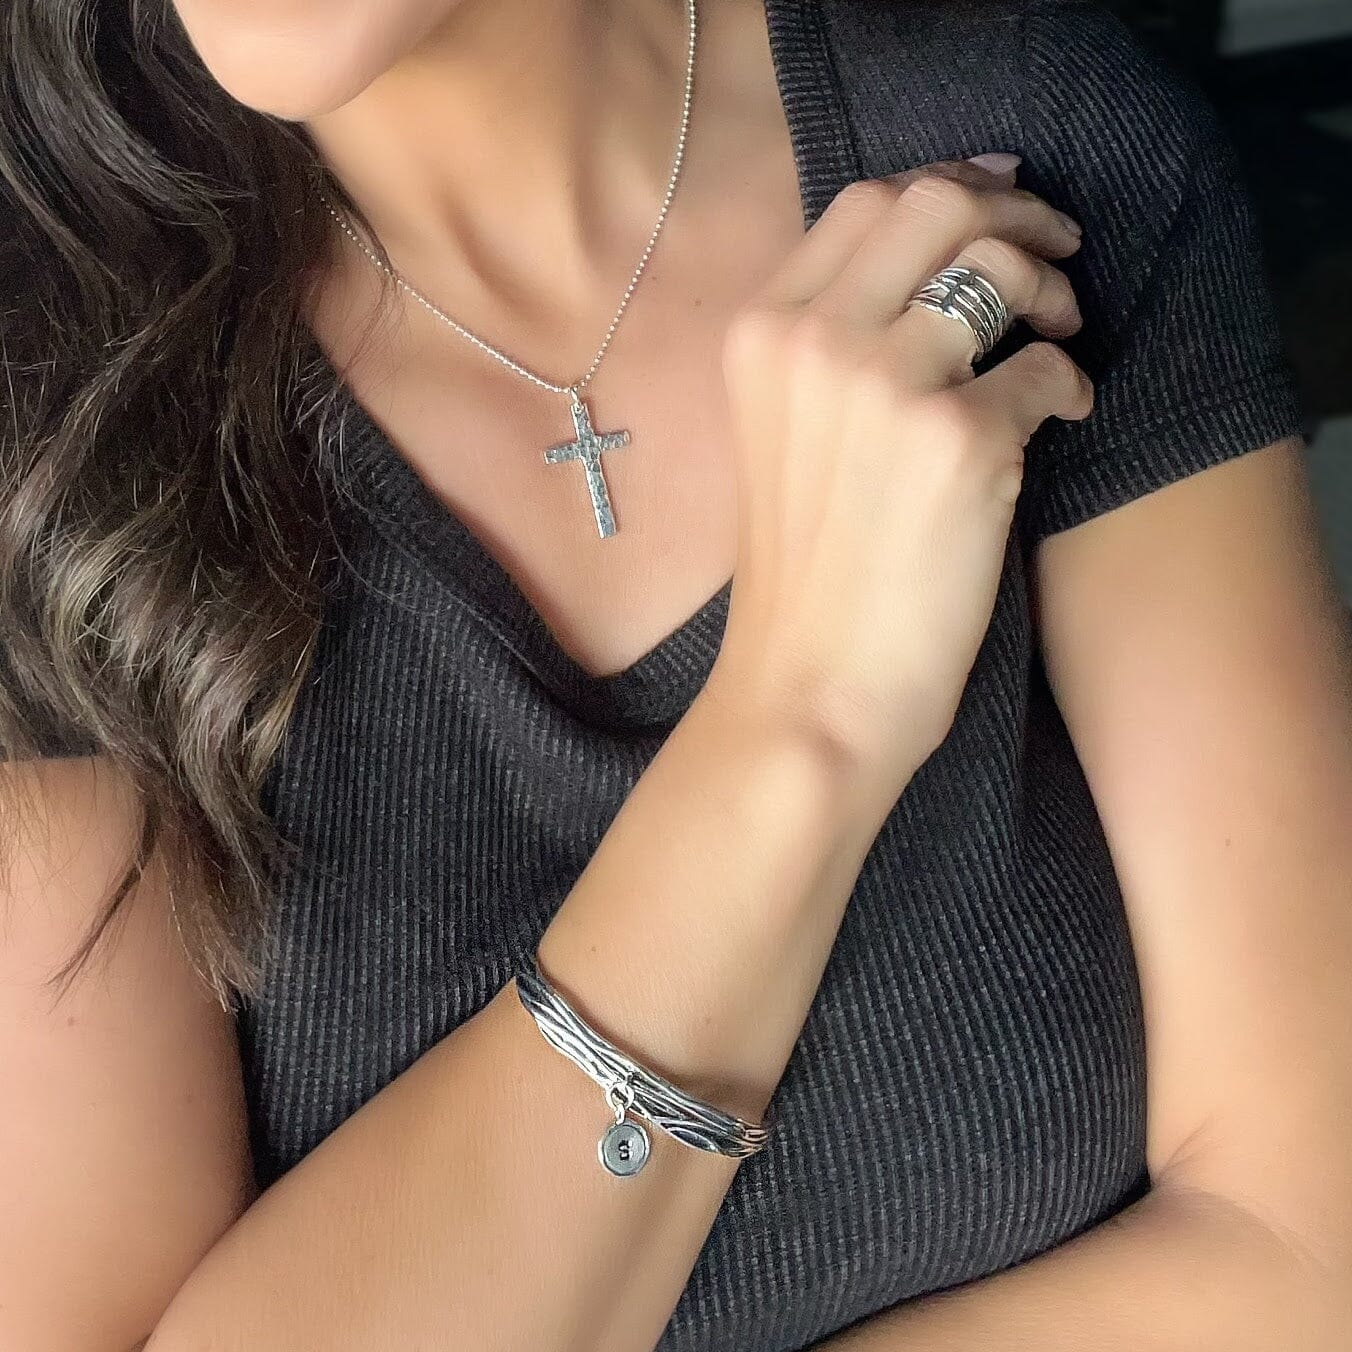 True You Personalized Cuff paired with Cherished One Necklace and Through it All Ring